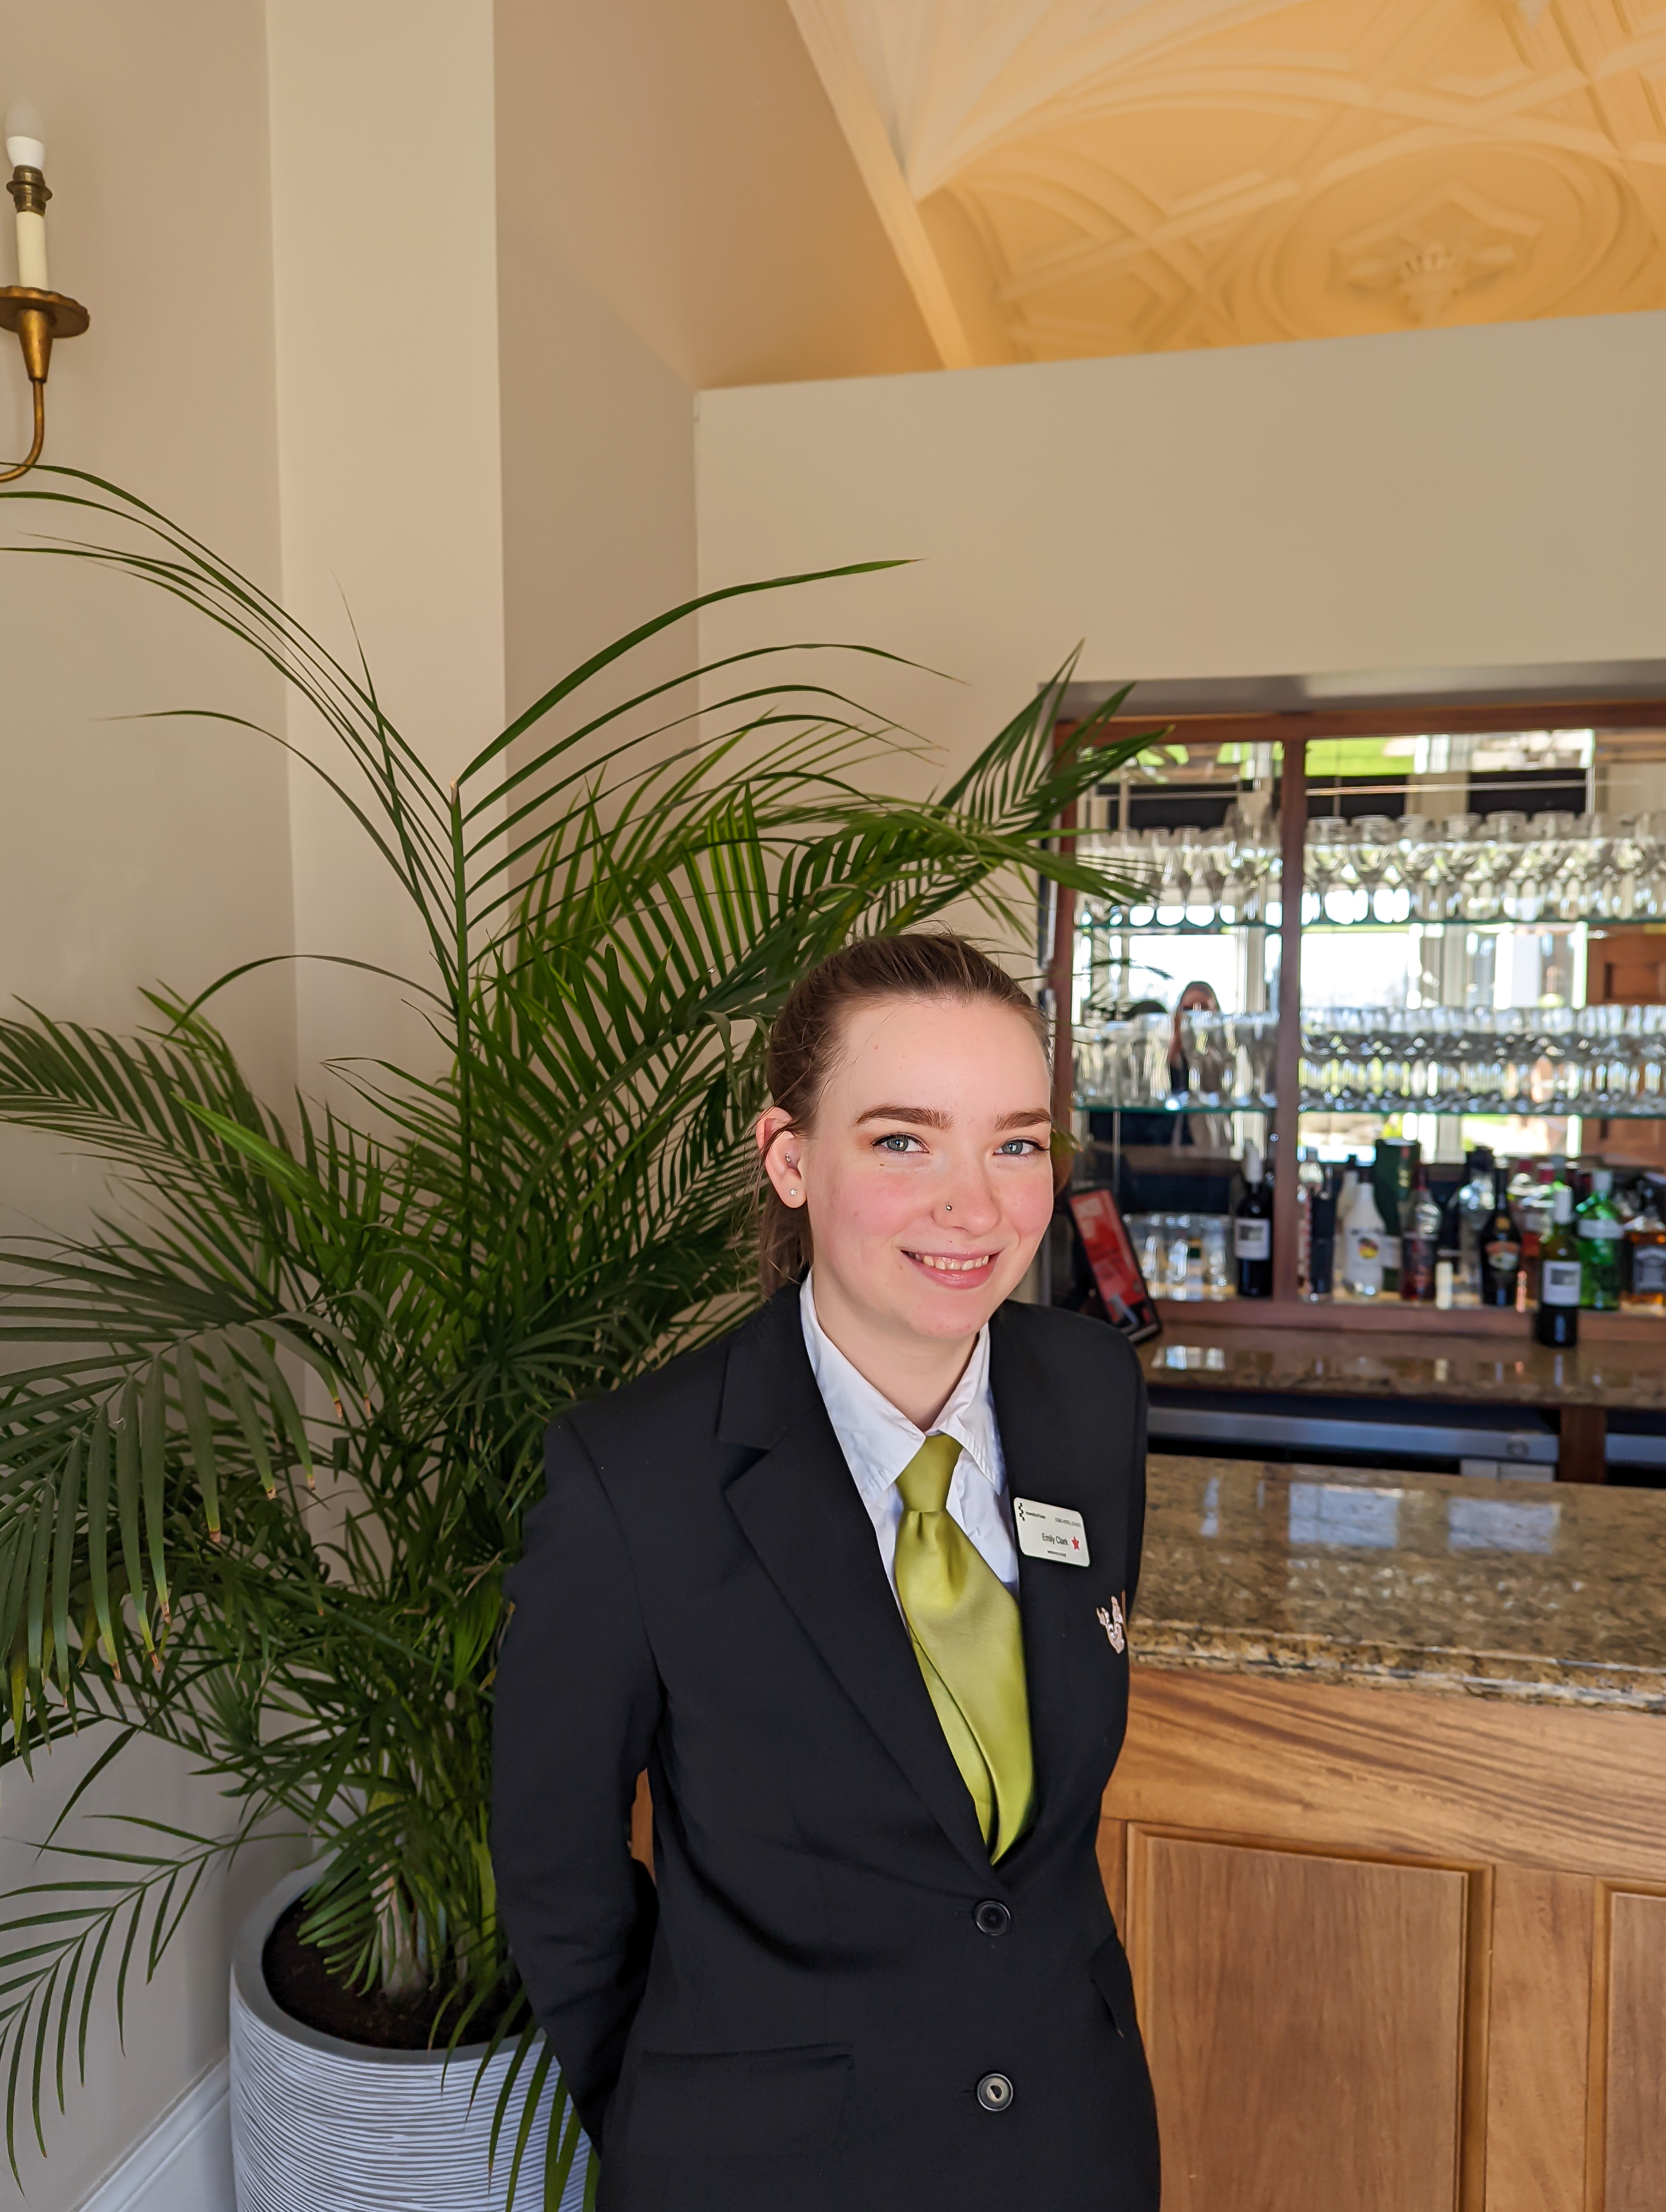 Student in Edge Hotel School uniform stood in front of a bar